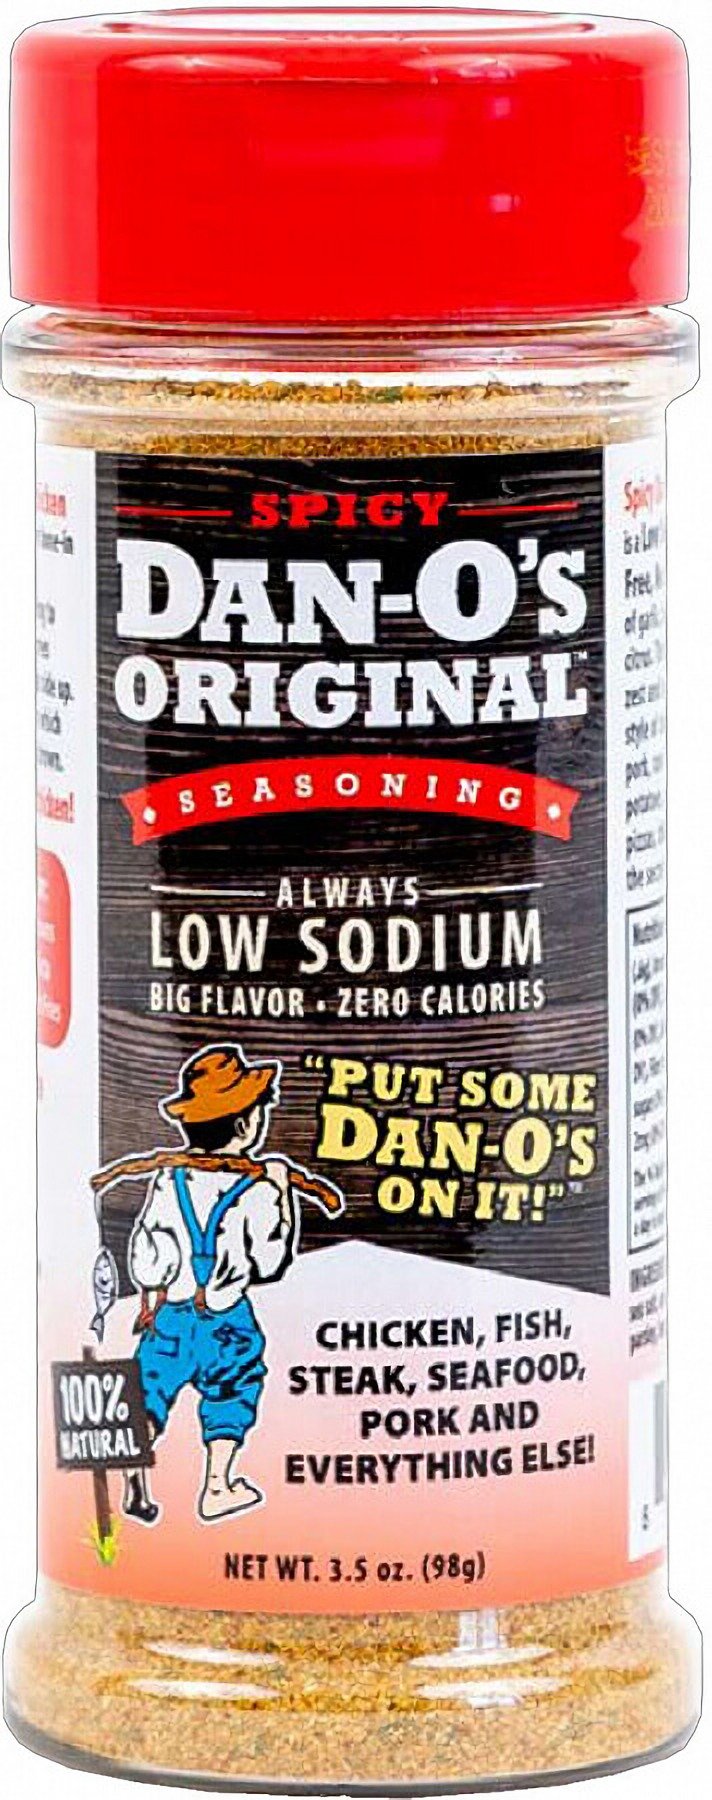 GoFoodservice on X: Wow, Dan-O's outdid themselves with their special  seasoning recipe. Rosemary, garlic, onion, lemon peel, orange peel, and  more! 100% natural, by the way!  #DanOs  #SpicySeasoning #KitchenSupplies